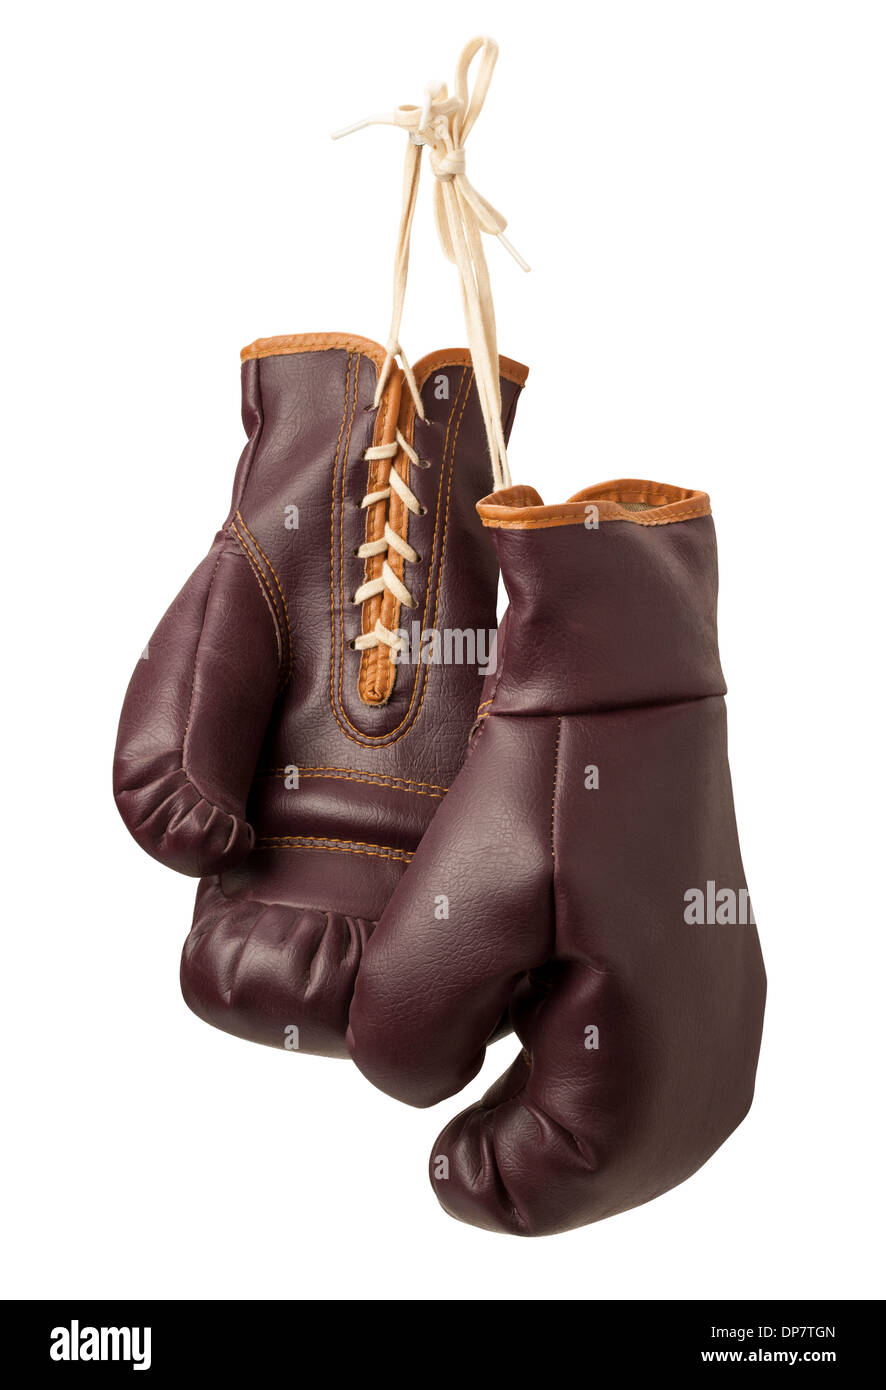 Vintage Boxing Gloves isolated on a white background Stock Photo